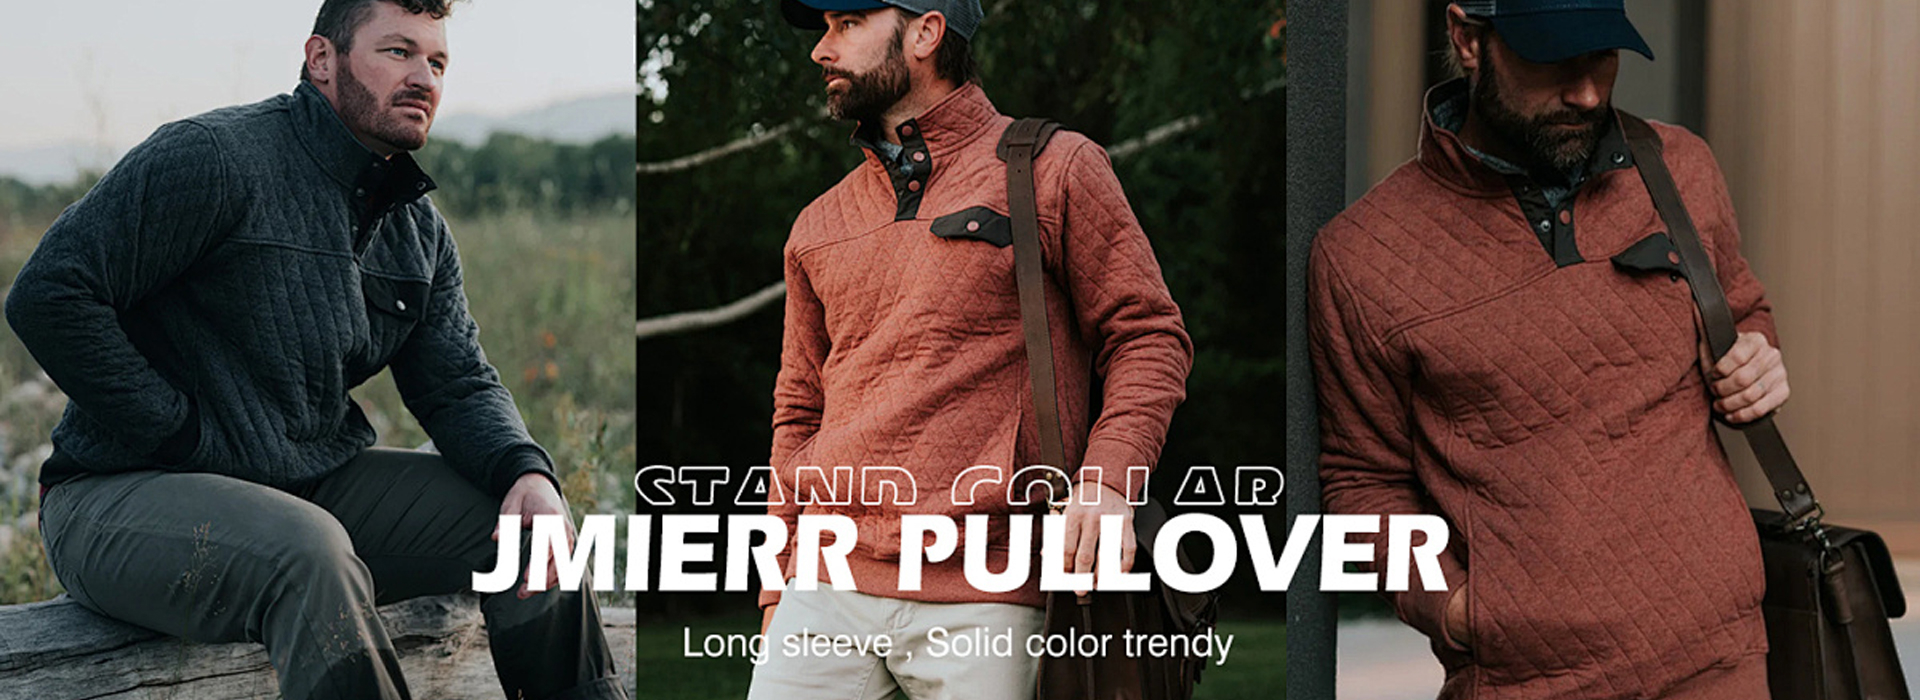 Discover Quality Outerwear for Less